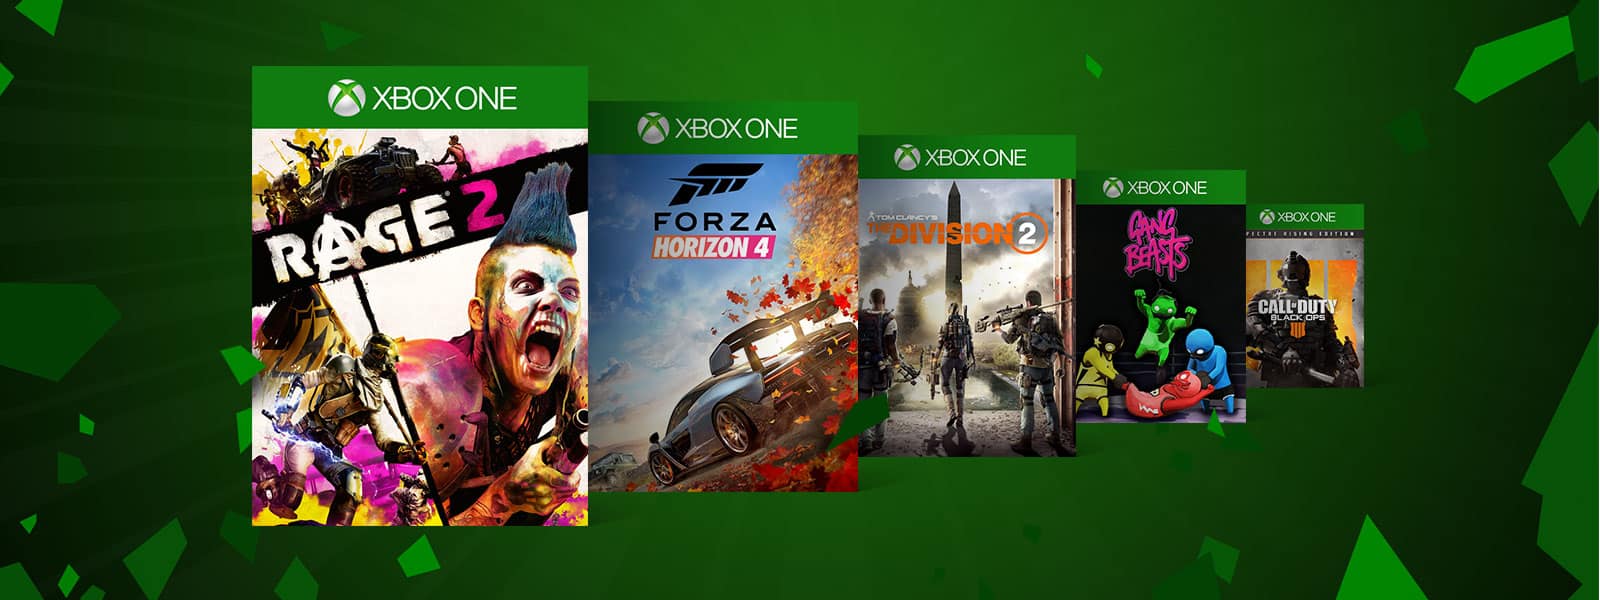 Save big on more than 500 Xbox games during the Xbox Super Game Sale, available now through July 29 - OnMSFT.com - July 16, 2019